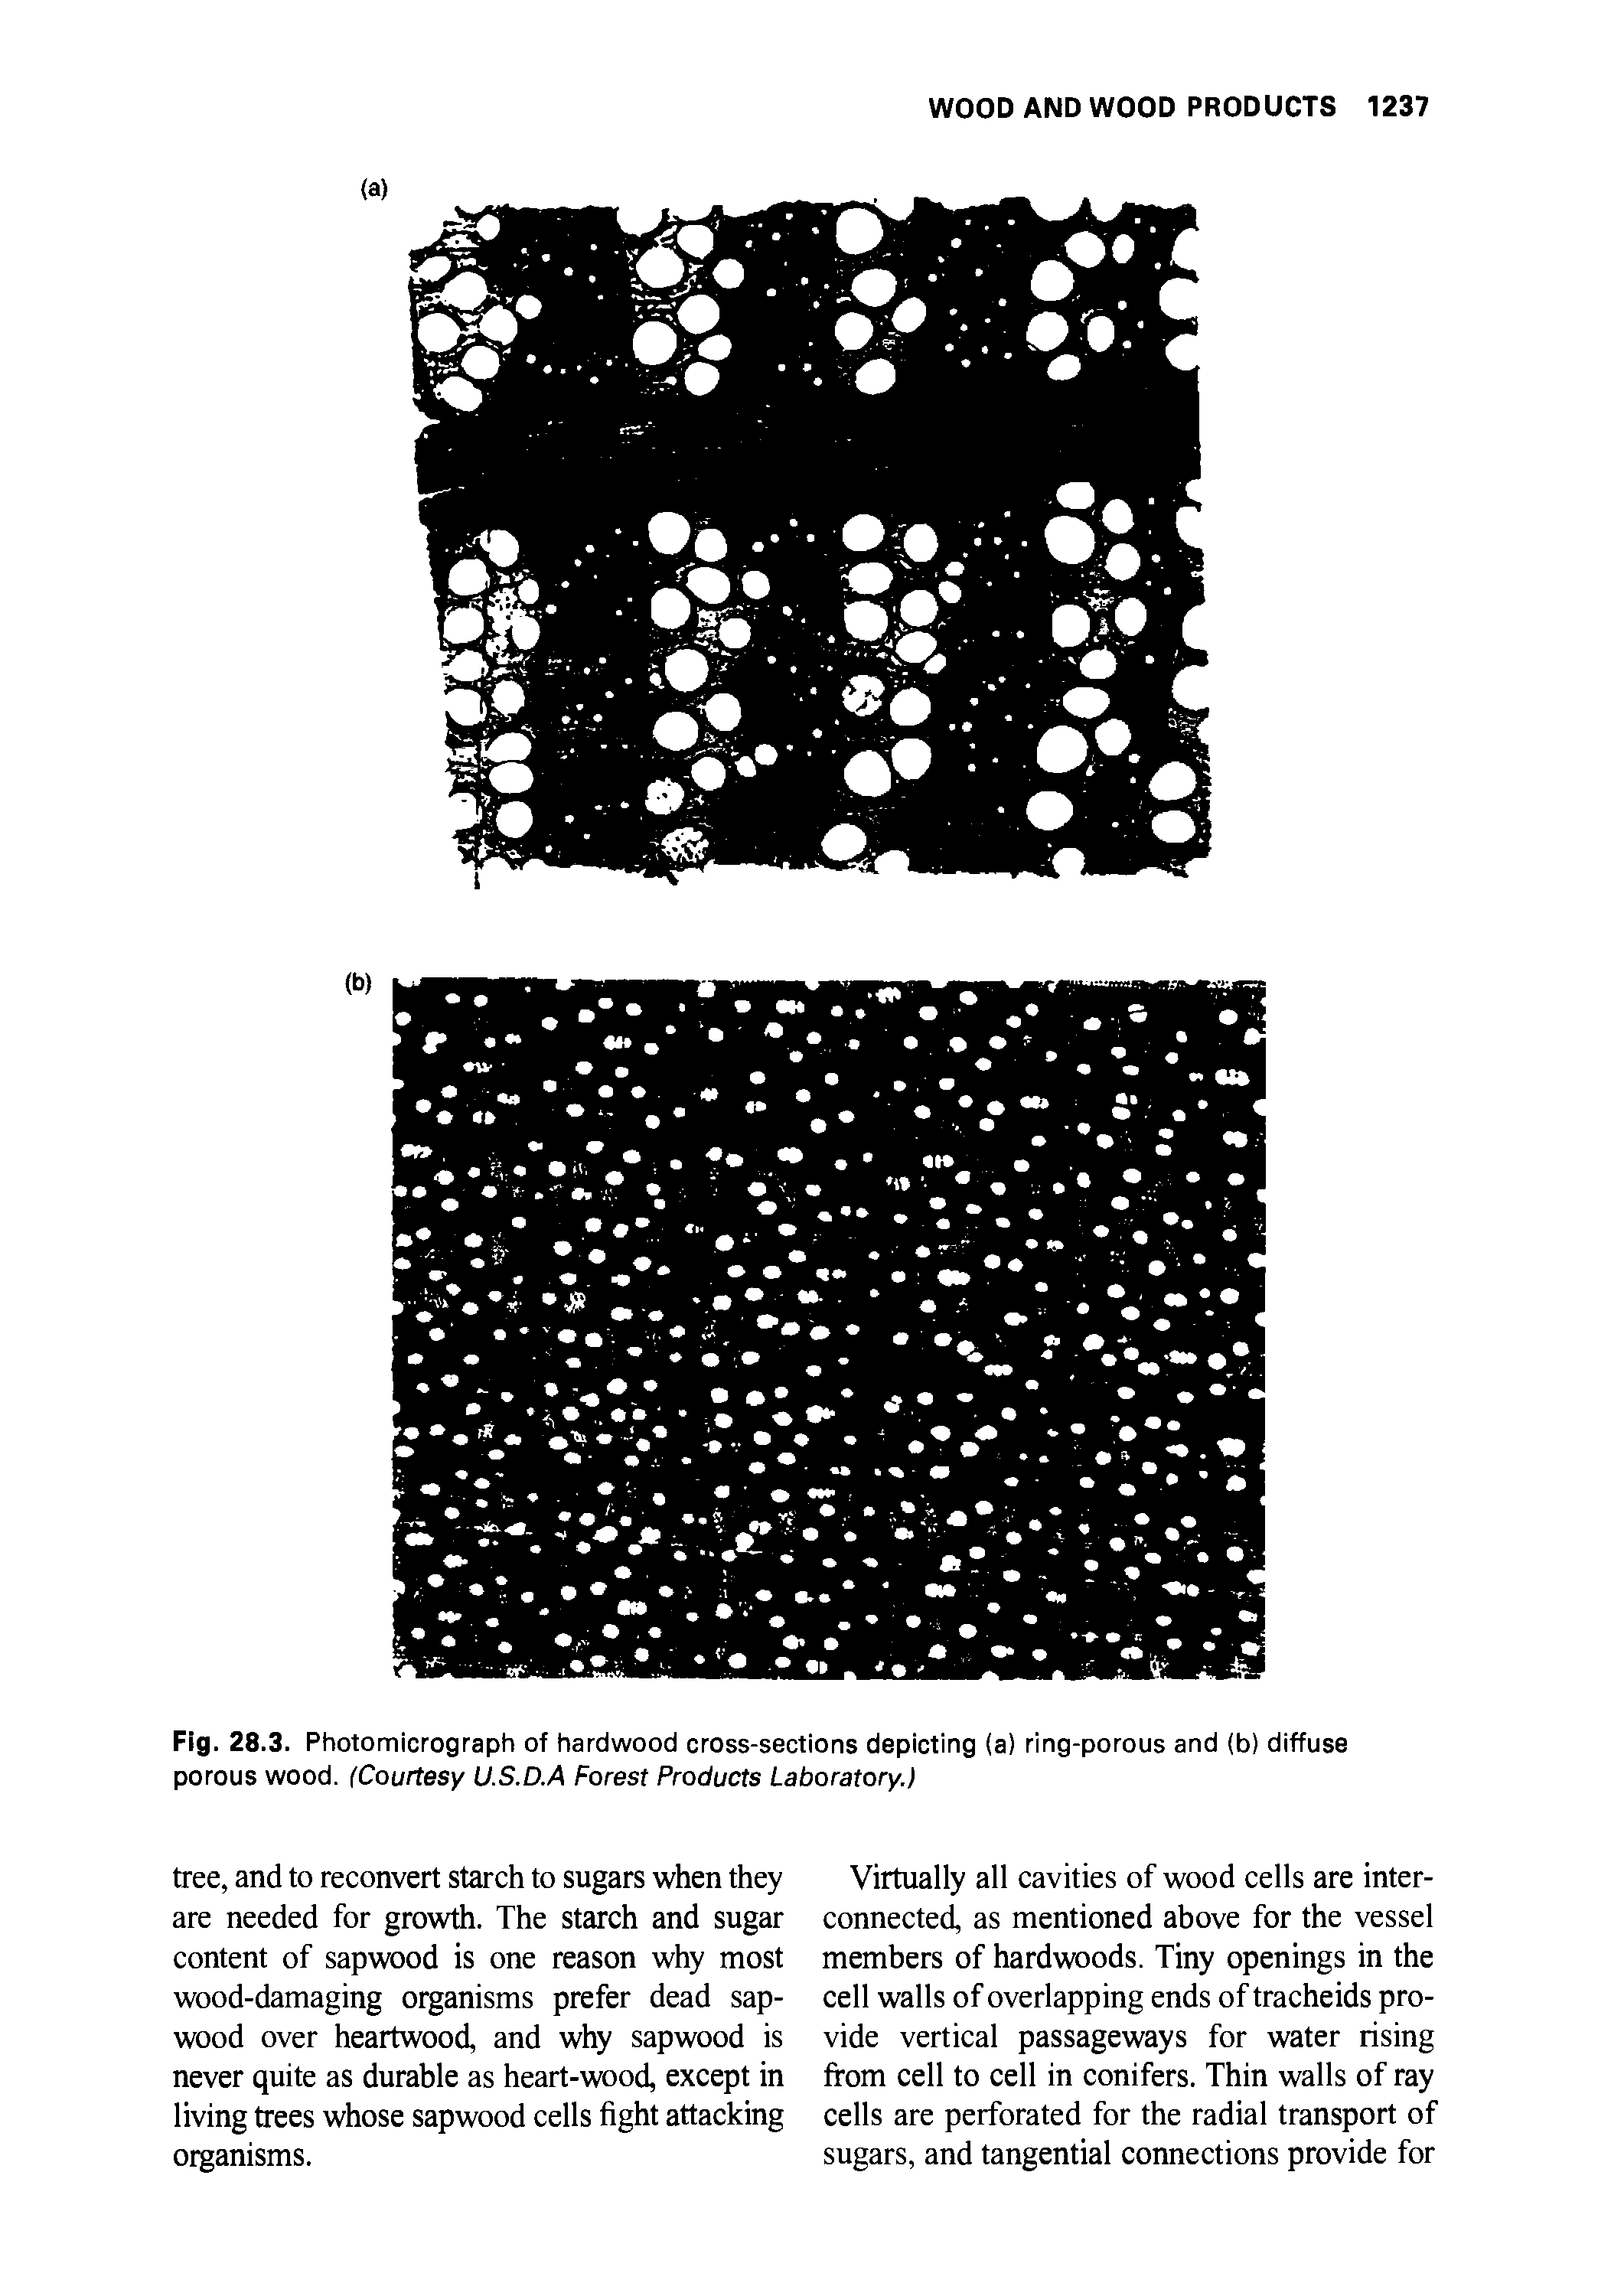 Fig. 28.3. Photomicrograph of hardwood cross-sections depicting (a) ring-porous and (b) diffuse porous wood. (Courtesy U.S.D.A Forest Products Laboratory.)...